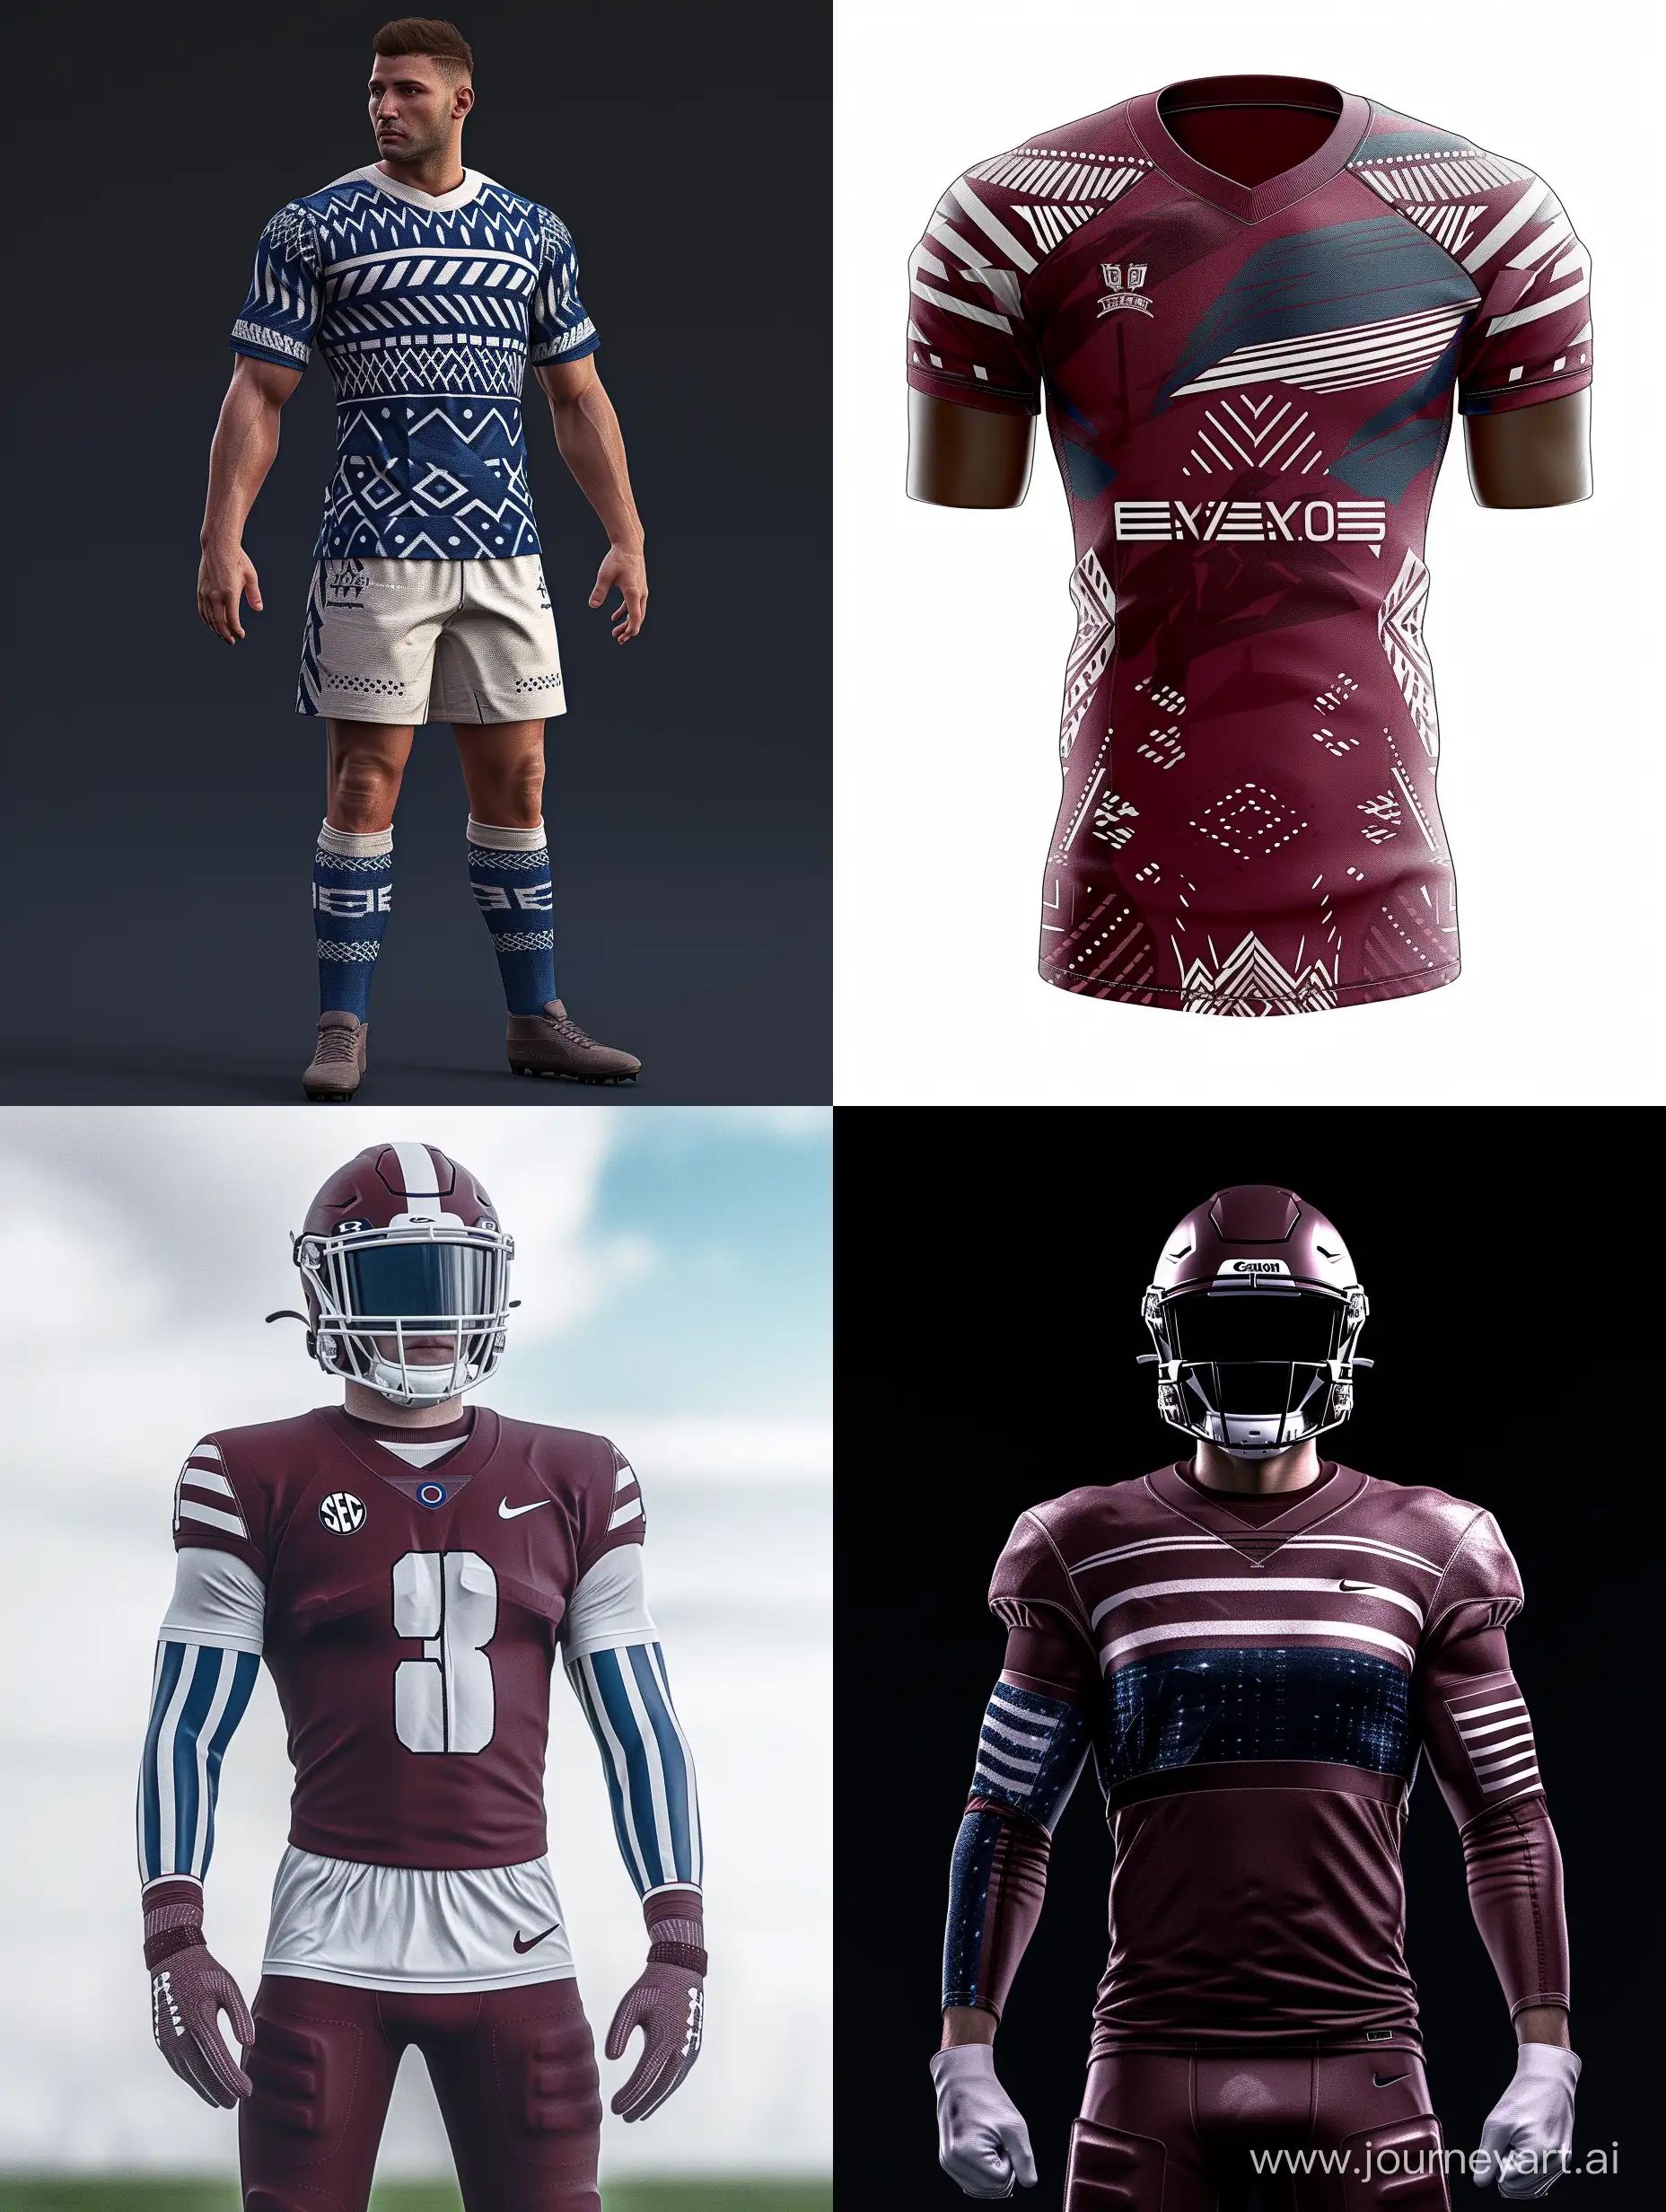 Ultra realistic, FOOTBALL TEAM JERSEY. MARUON COLORED. THERE ARE STRIPES AND MODERN PATTERNS IN BLUE AND WHITE ON THE ARMS AND CHEST.un. canon eos-id x mark iii dslr --v 6.0